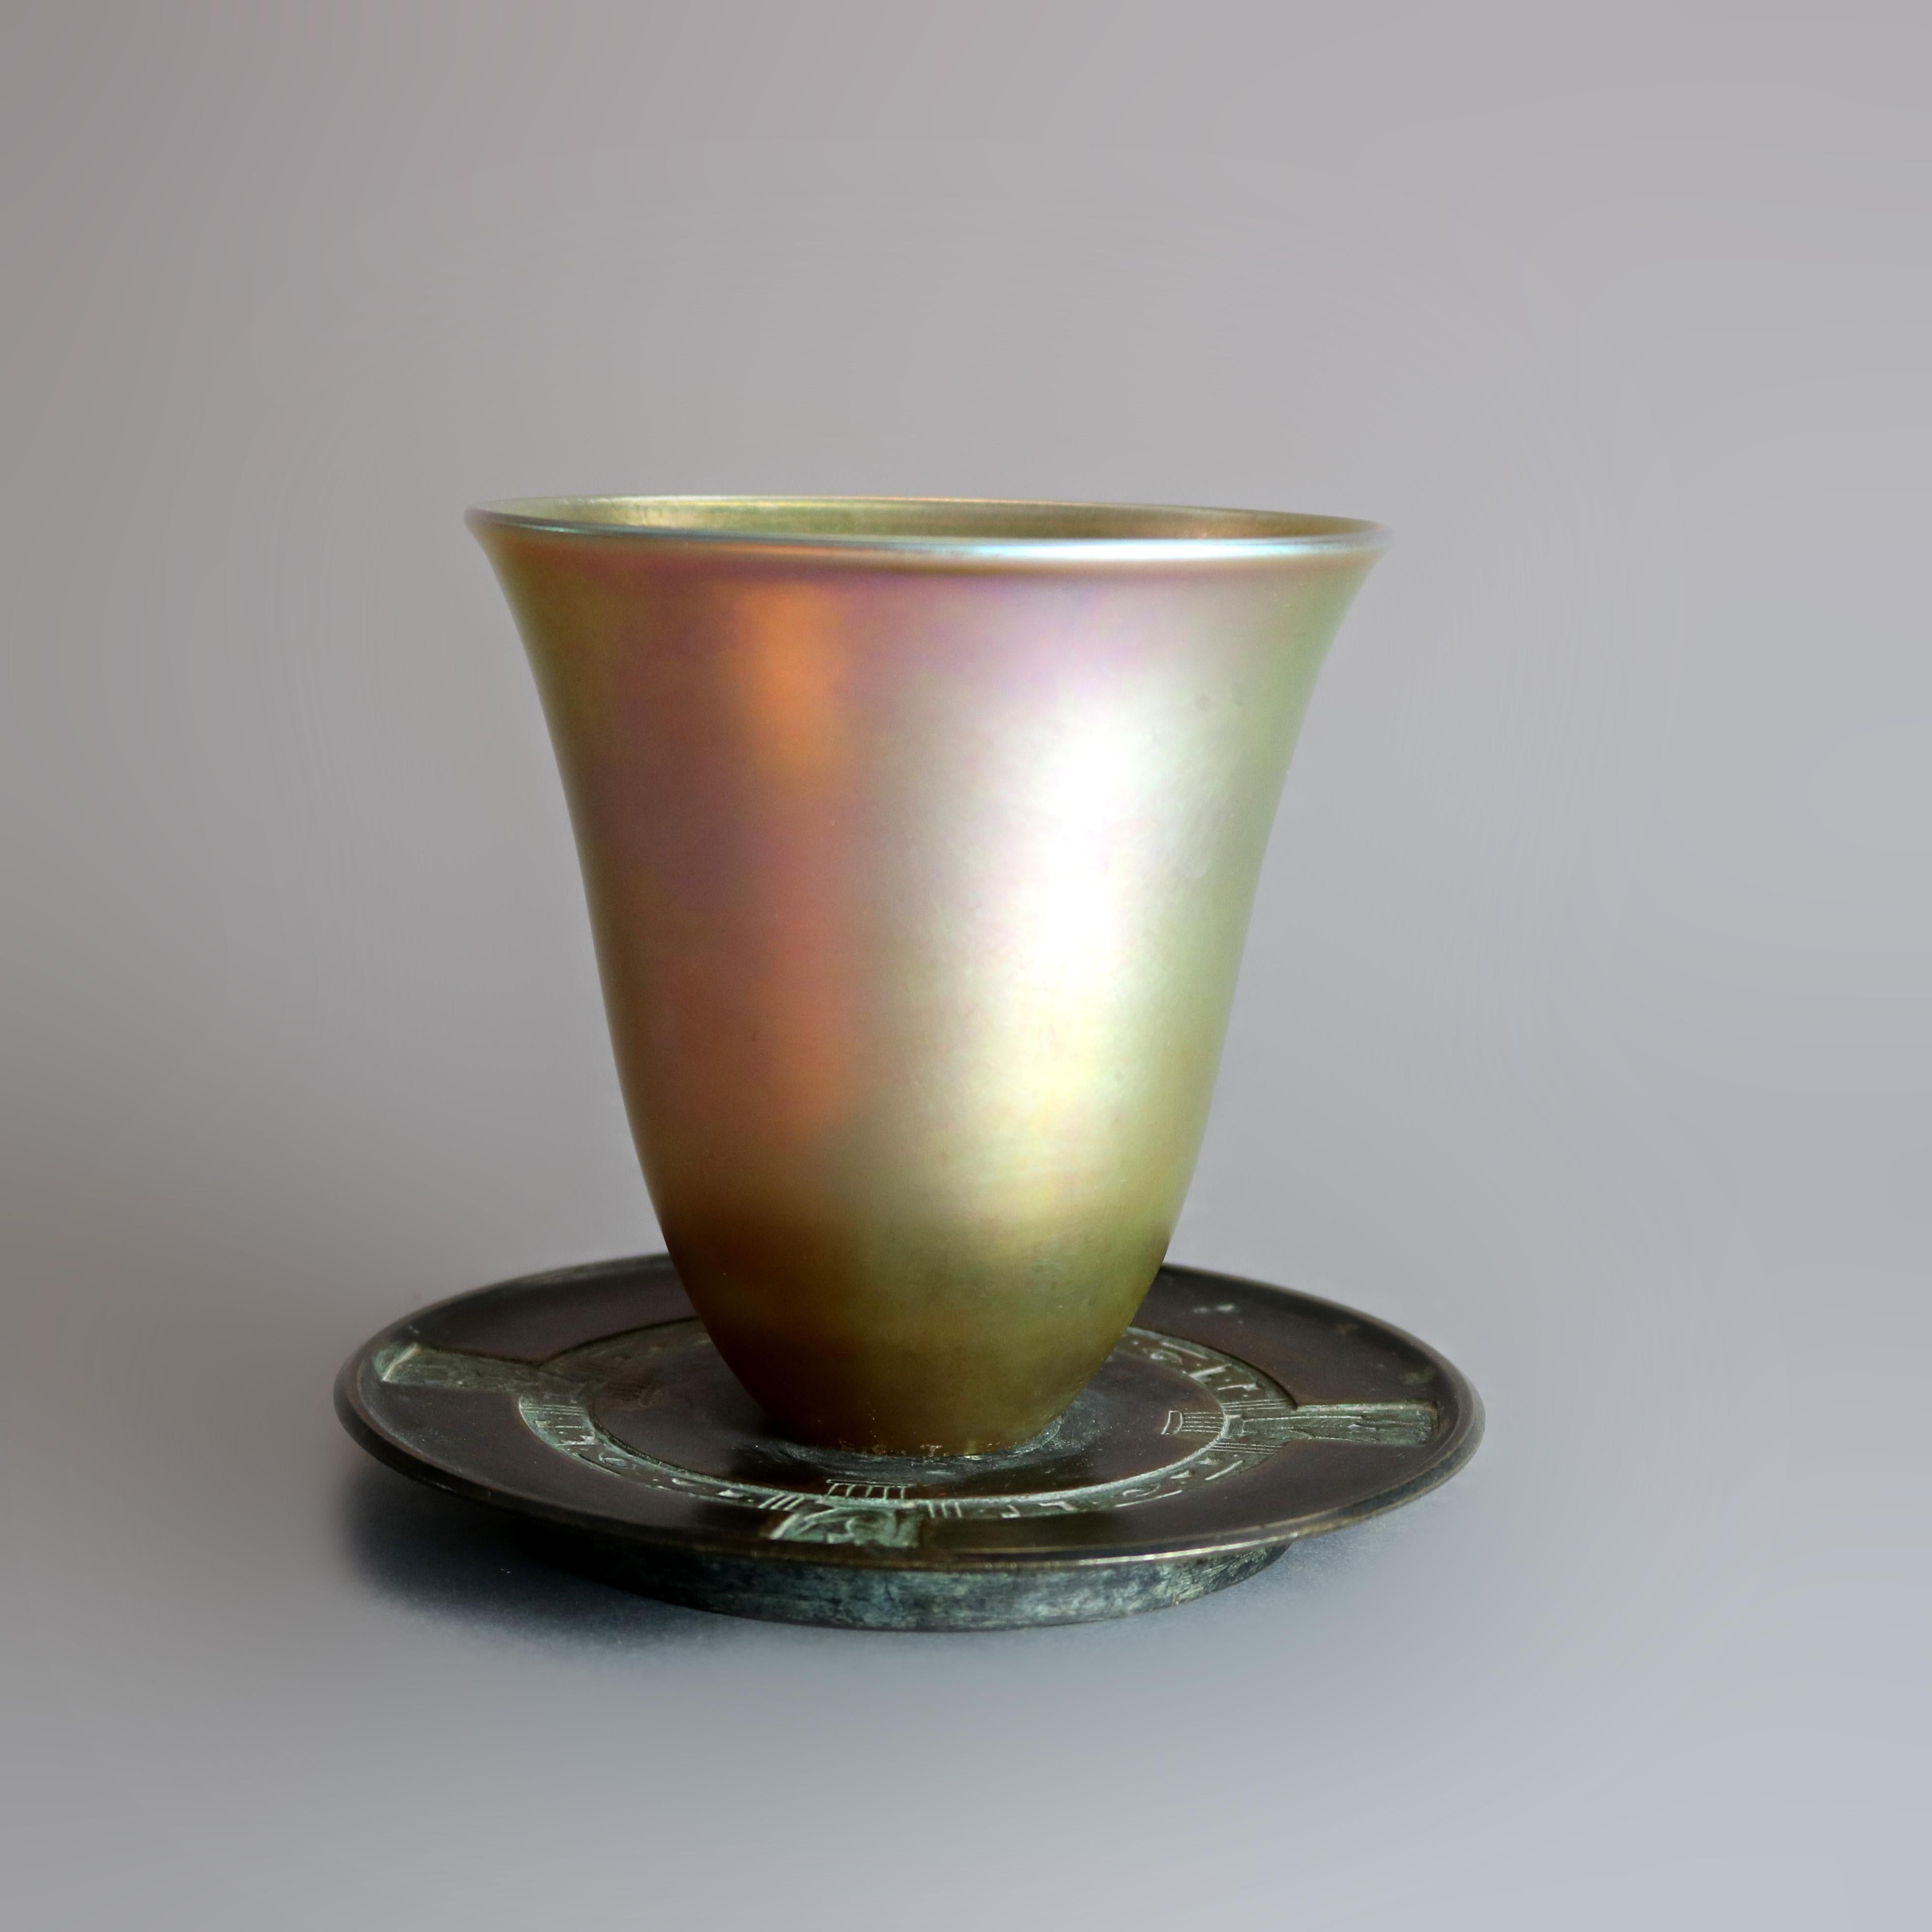 An antique Egyptian Revival libation cup by Tiffany & Co. offers flared Favrile art glass vessel seated on cast bronze base with repeating design having symbols and stylized figures, stamped on base as photographed, circa 1890

Measures: 4.5